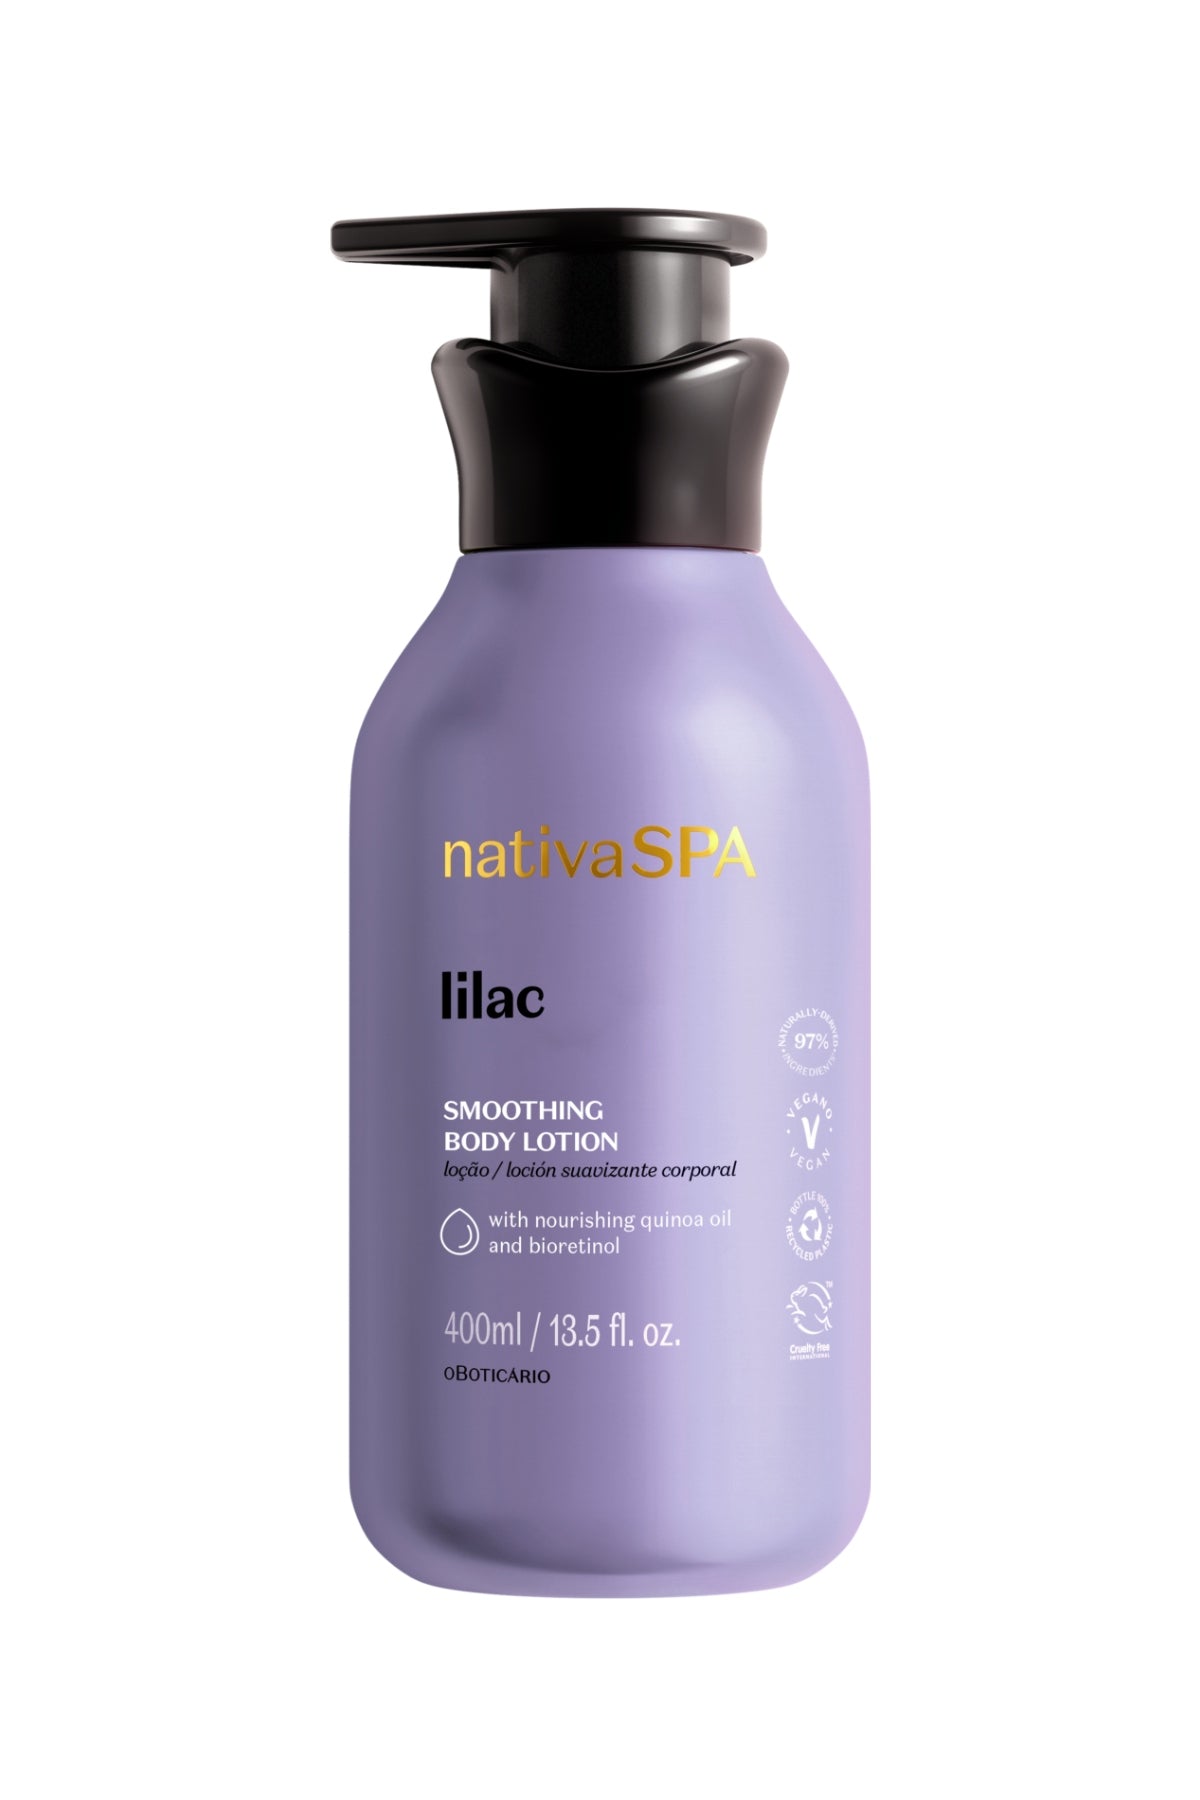 Nativa SPA Lilac Smoothing Body Lotion